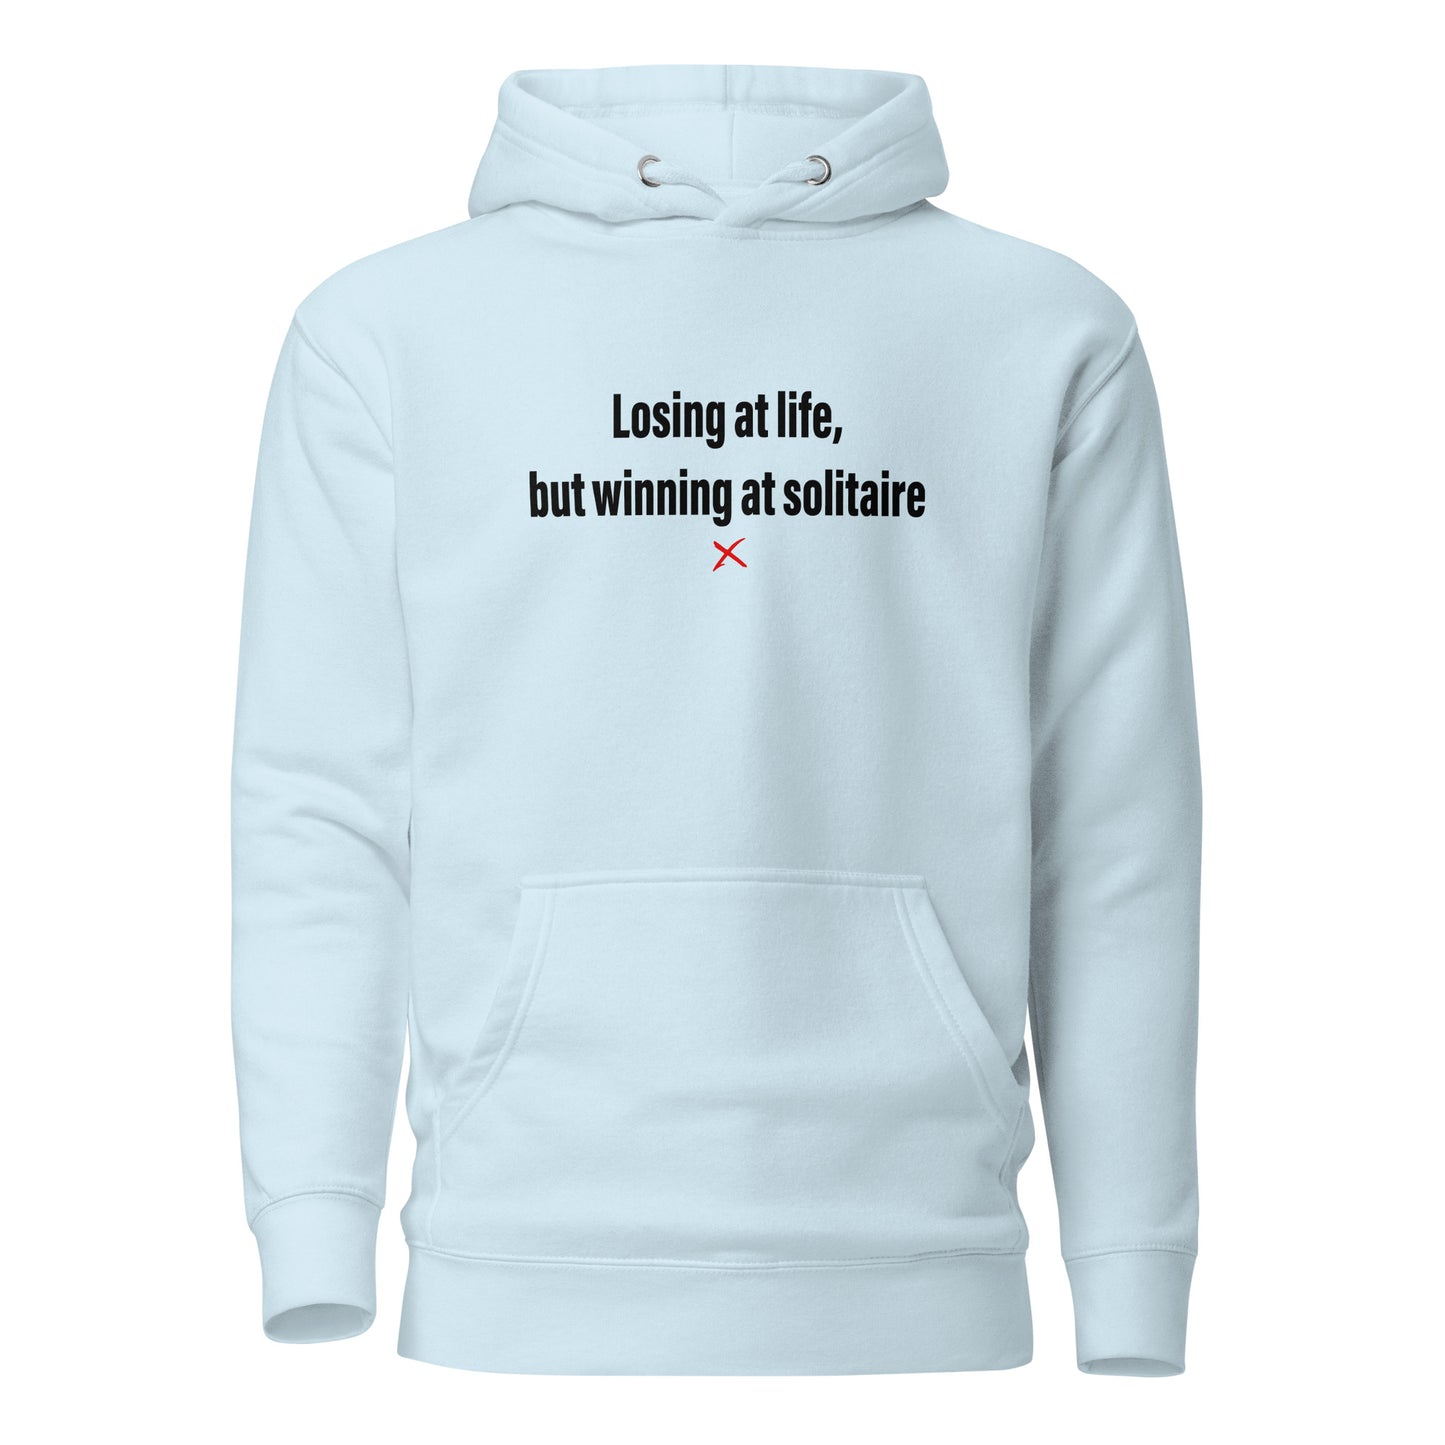 Losing at life, but winning at solitaire - Hoodie